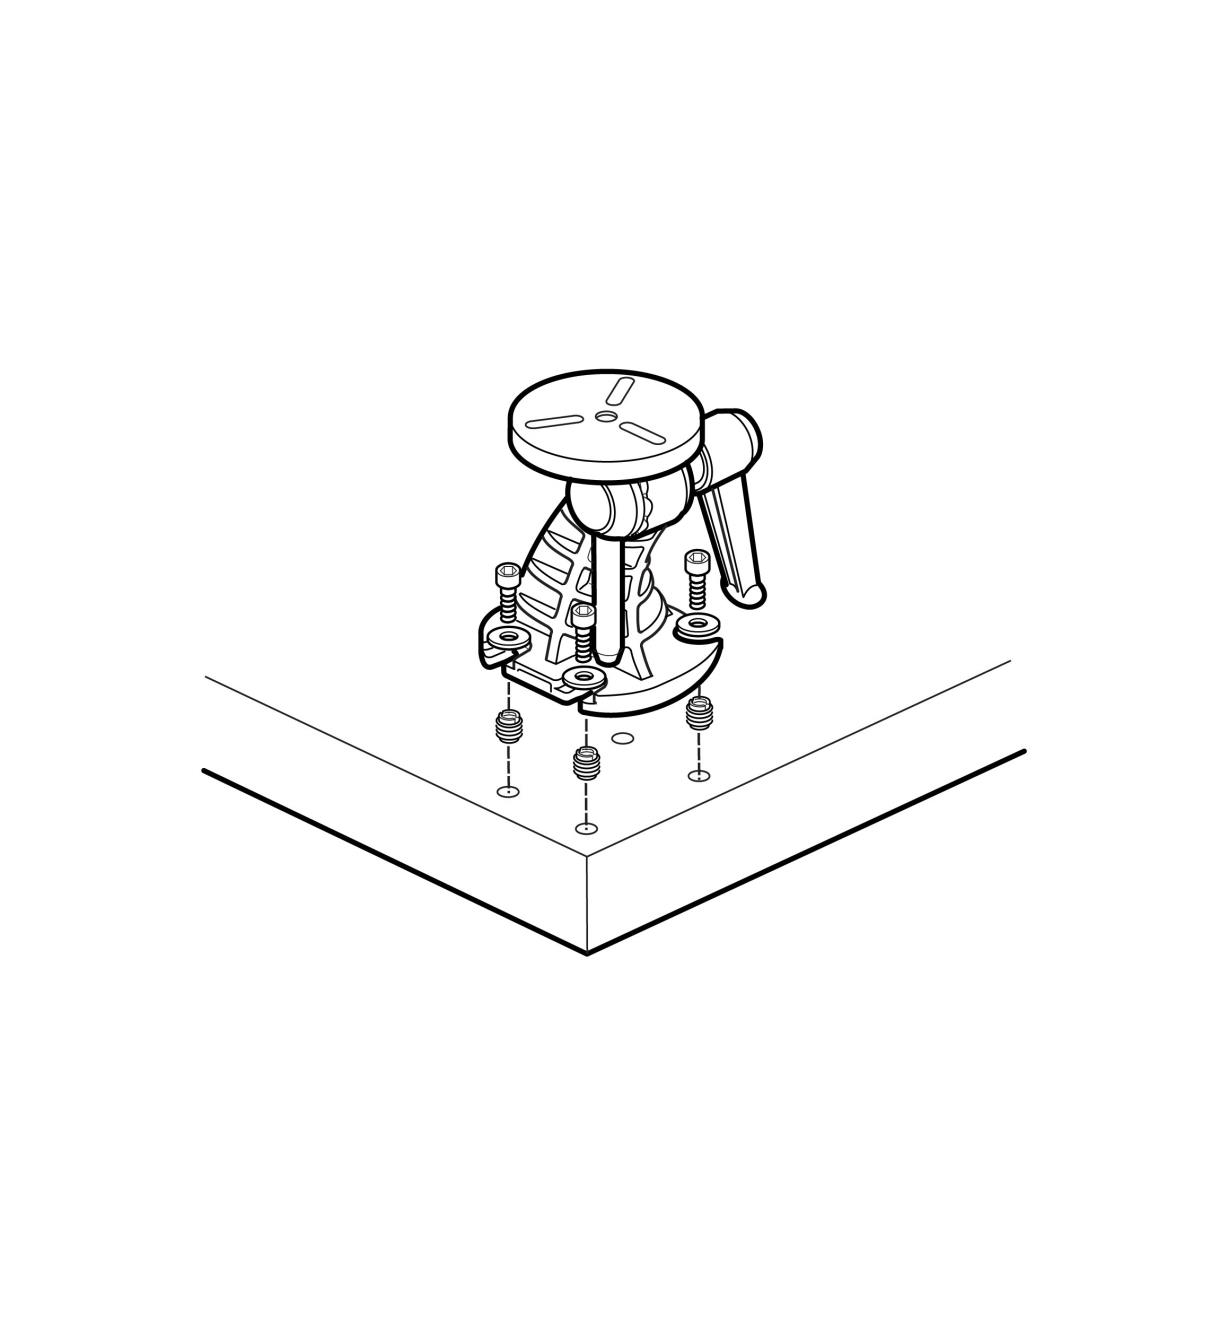 Illustration showing how to bolt the vise to a benchtop